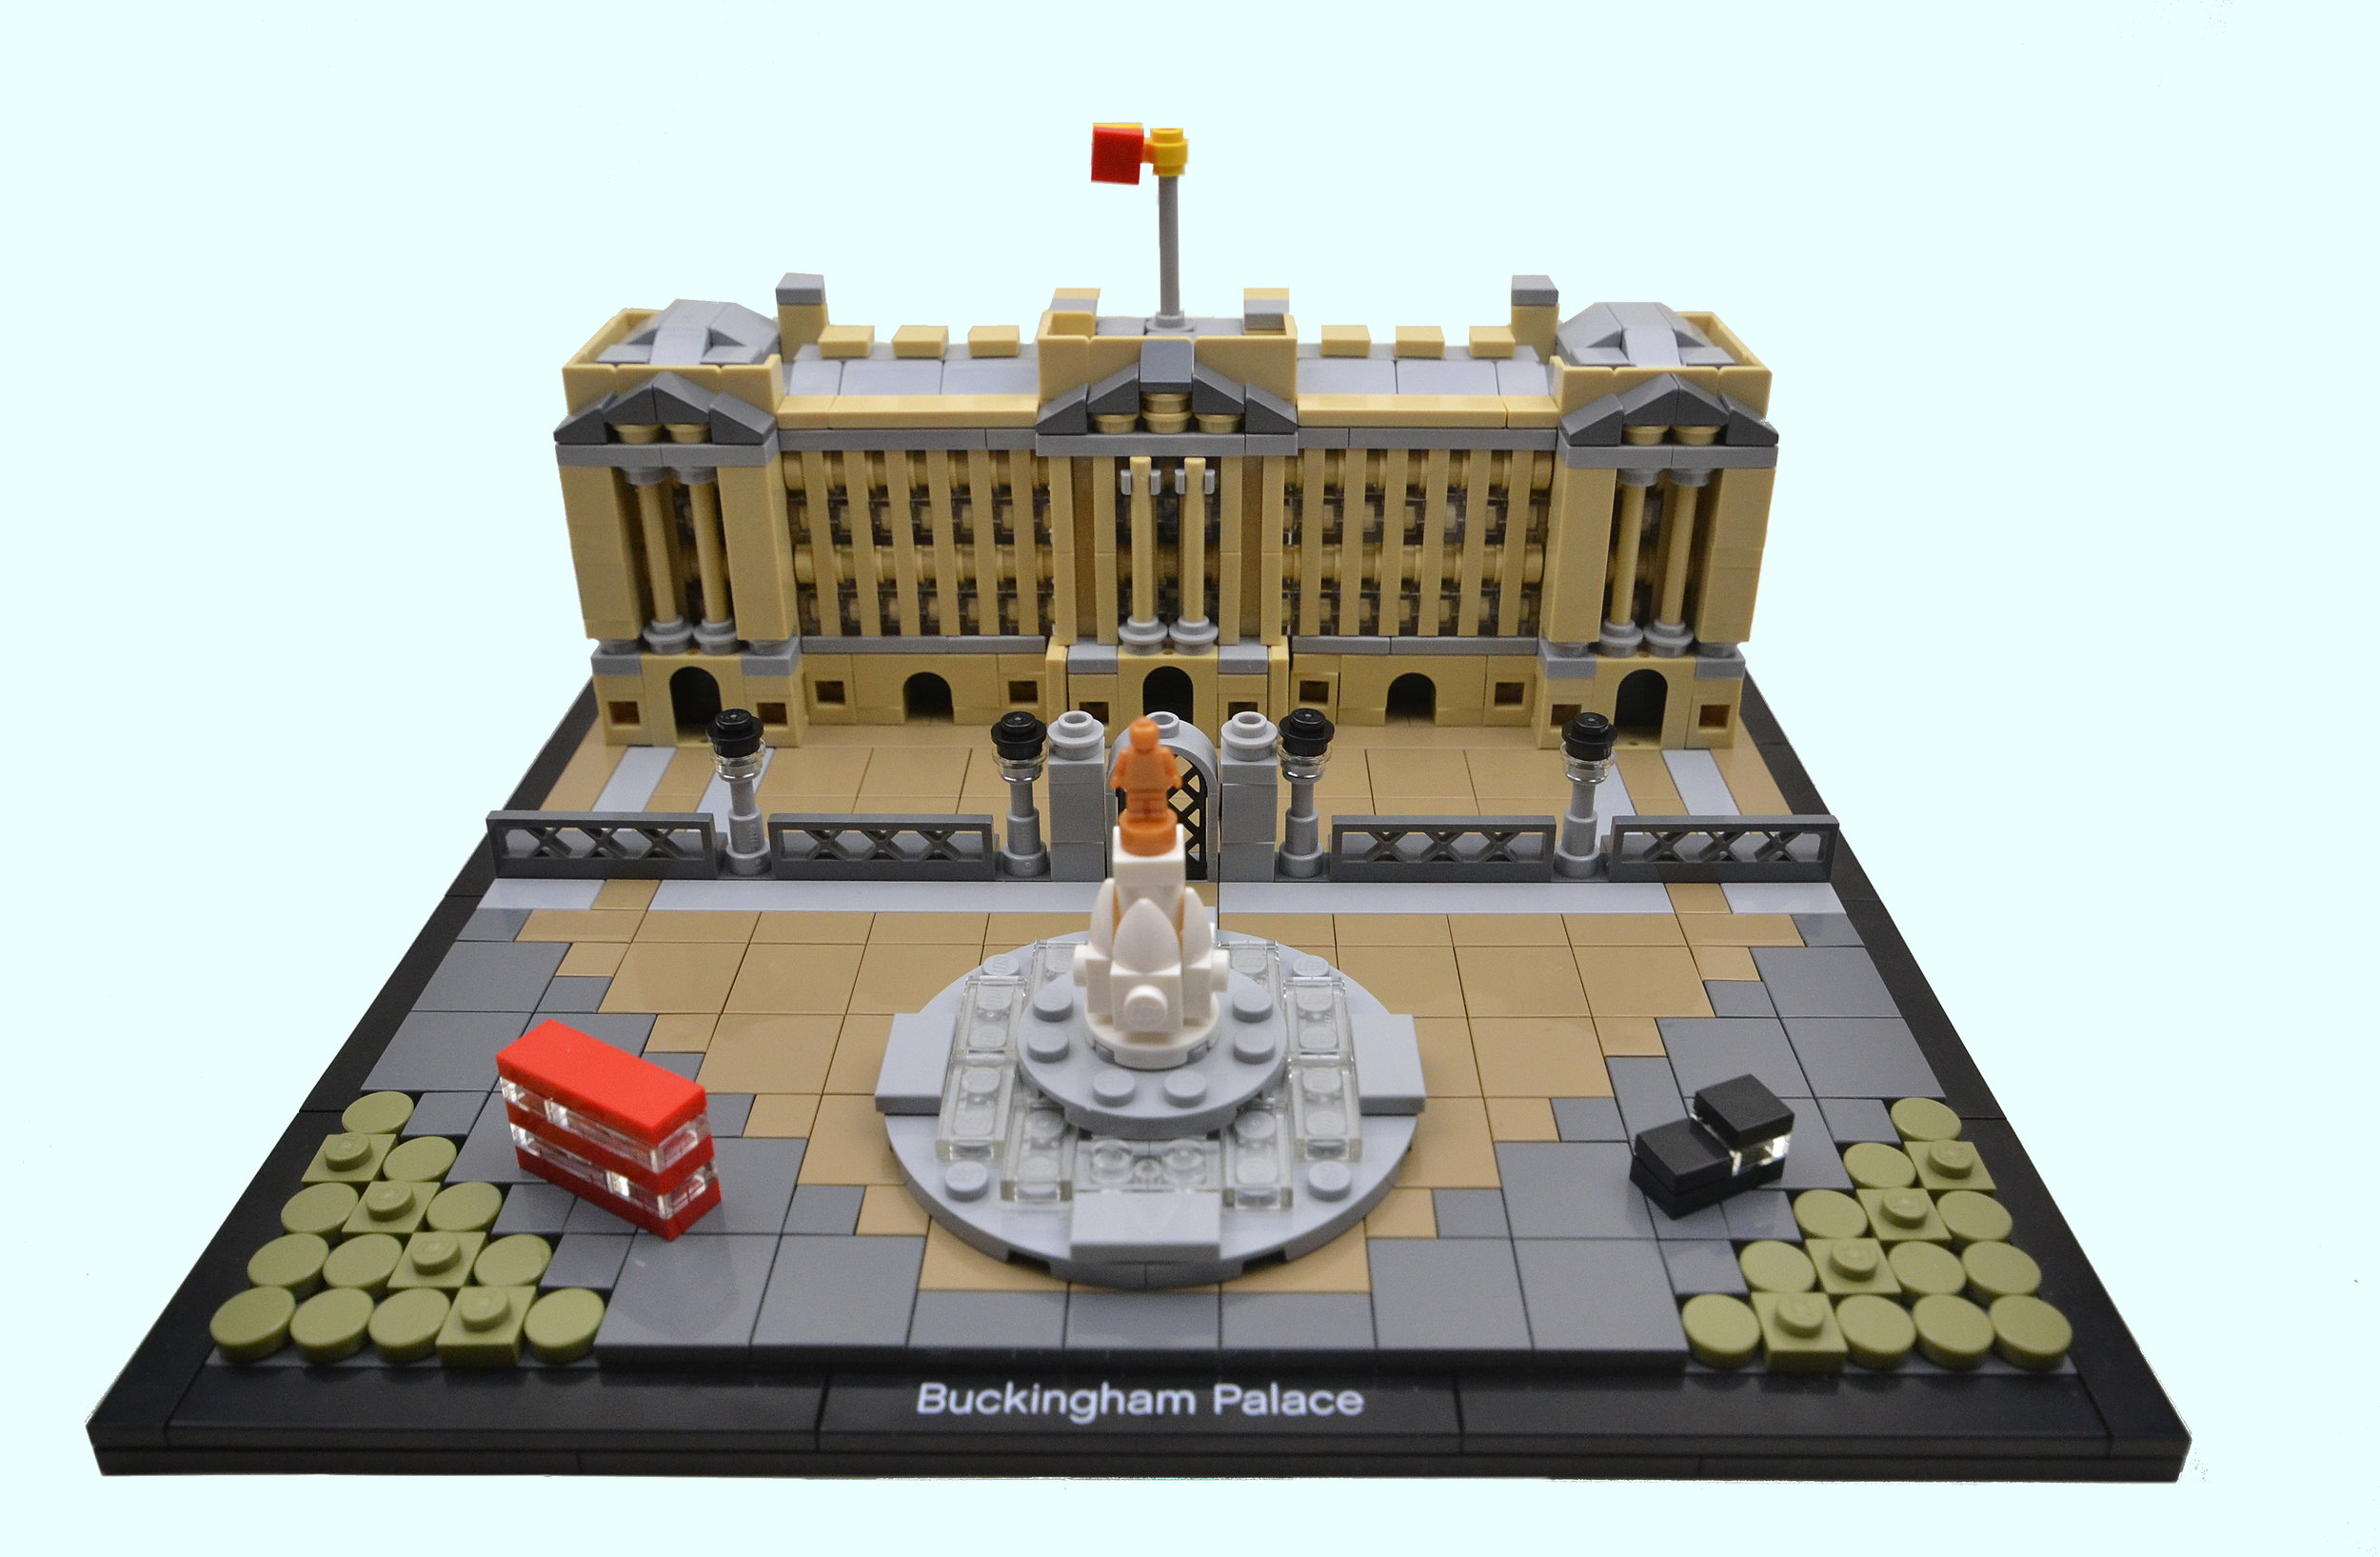 Review: LEGO Buckingham Palace 21029 - All LEGO and the LEGO fan community